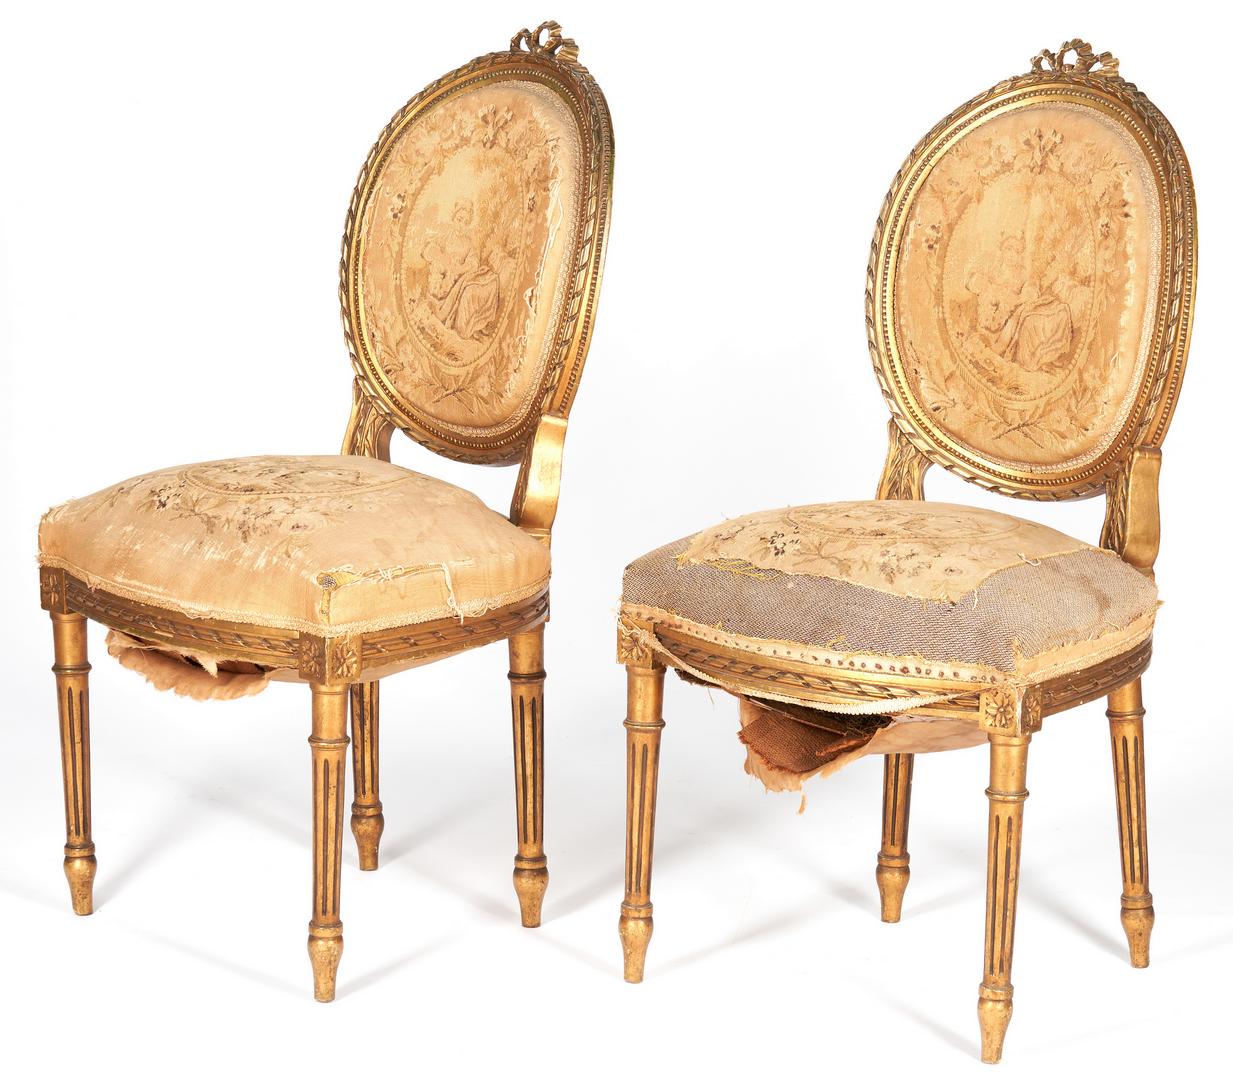 Lot 1109: 4 Louis XVI style giltwood chairs